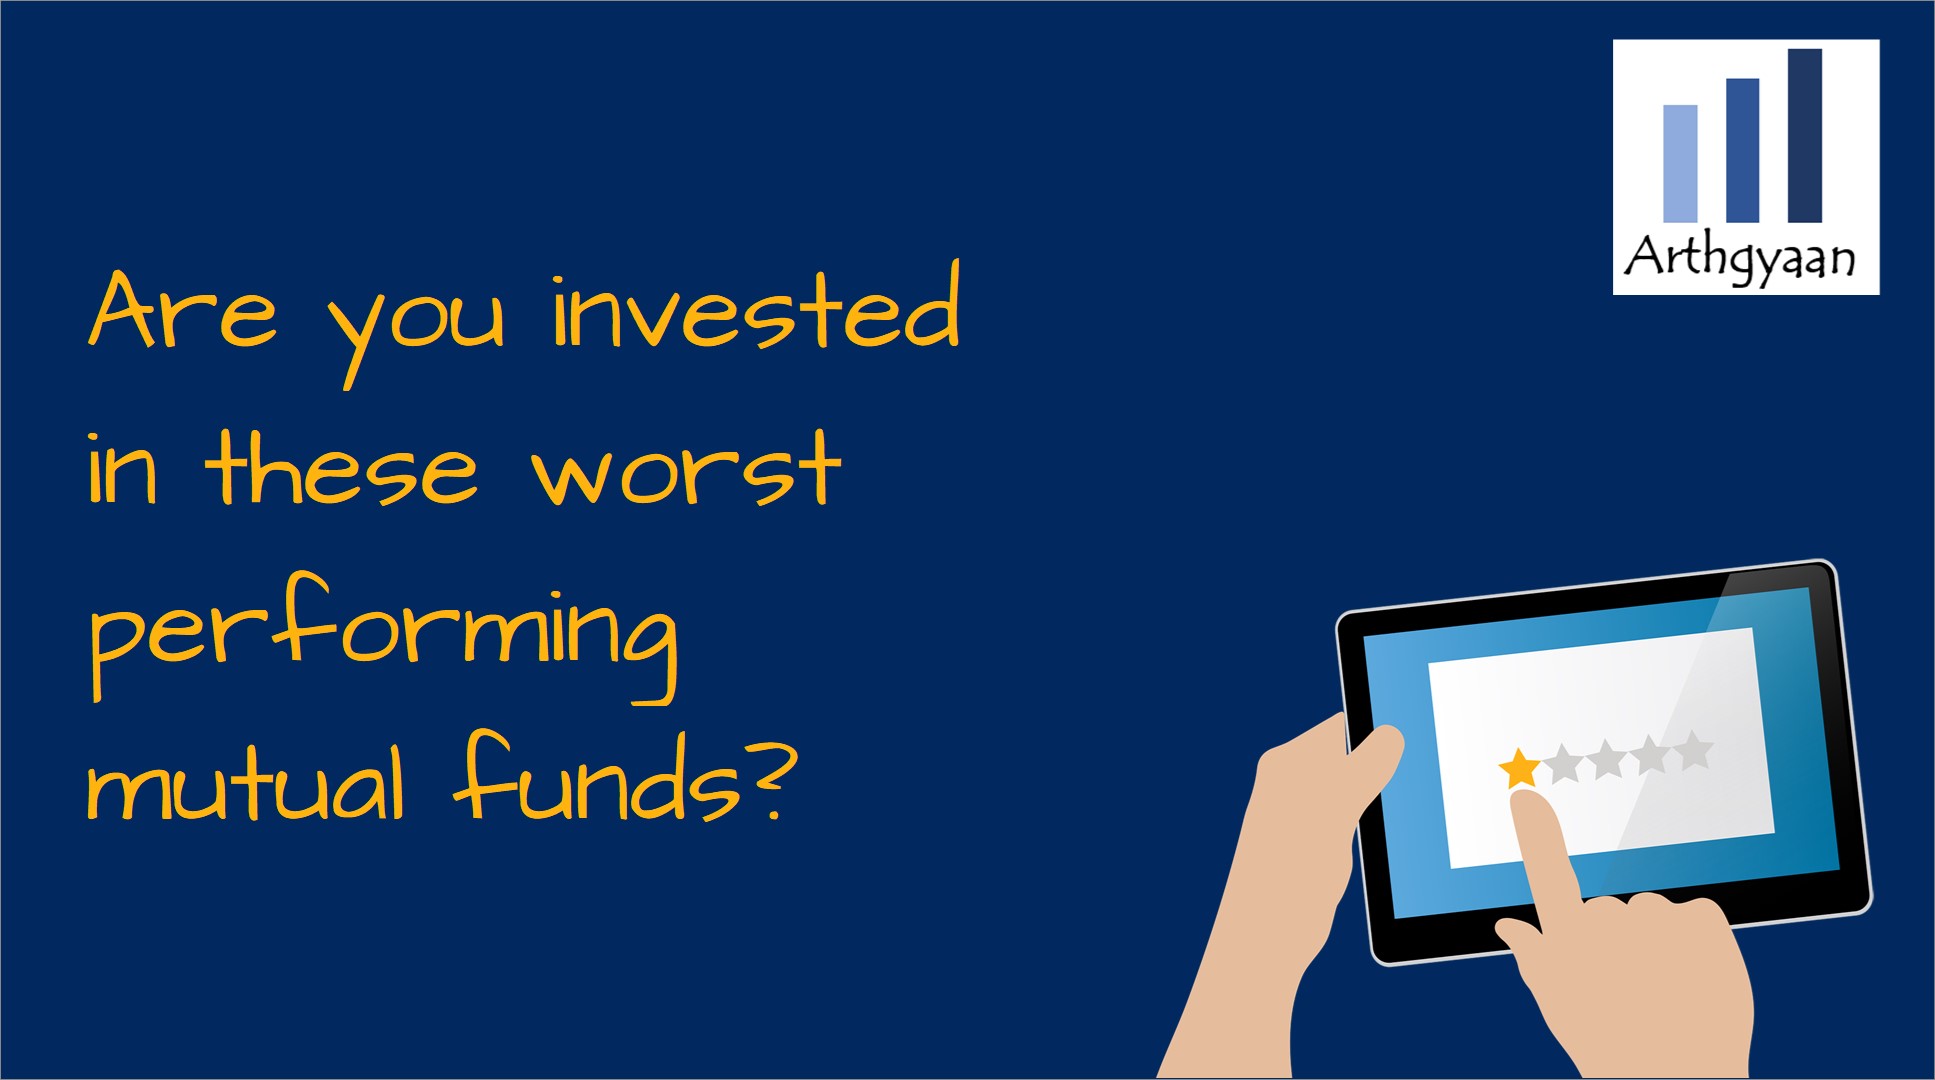 Are you invested in these worst-performing mutual funds?